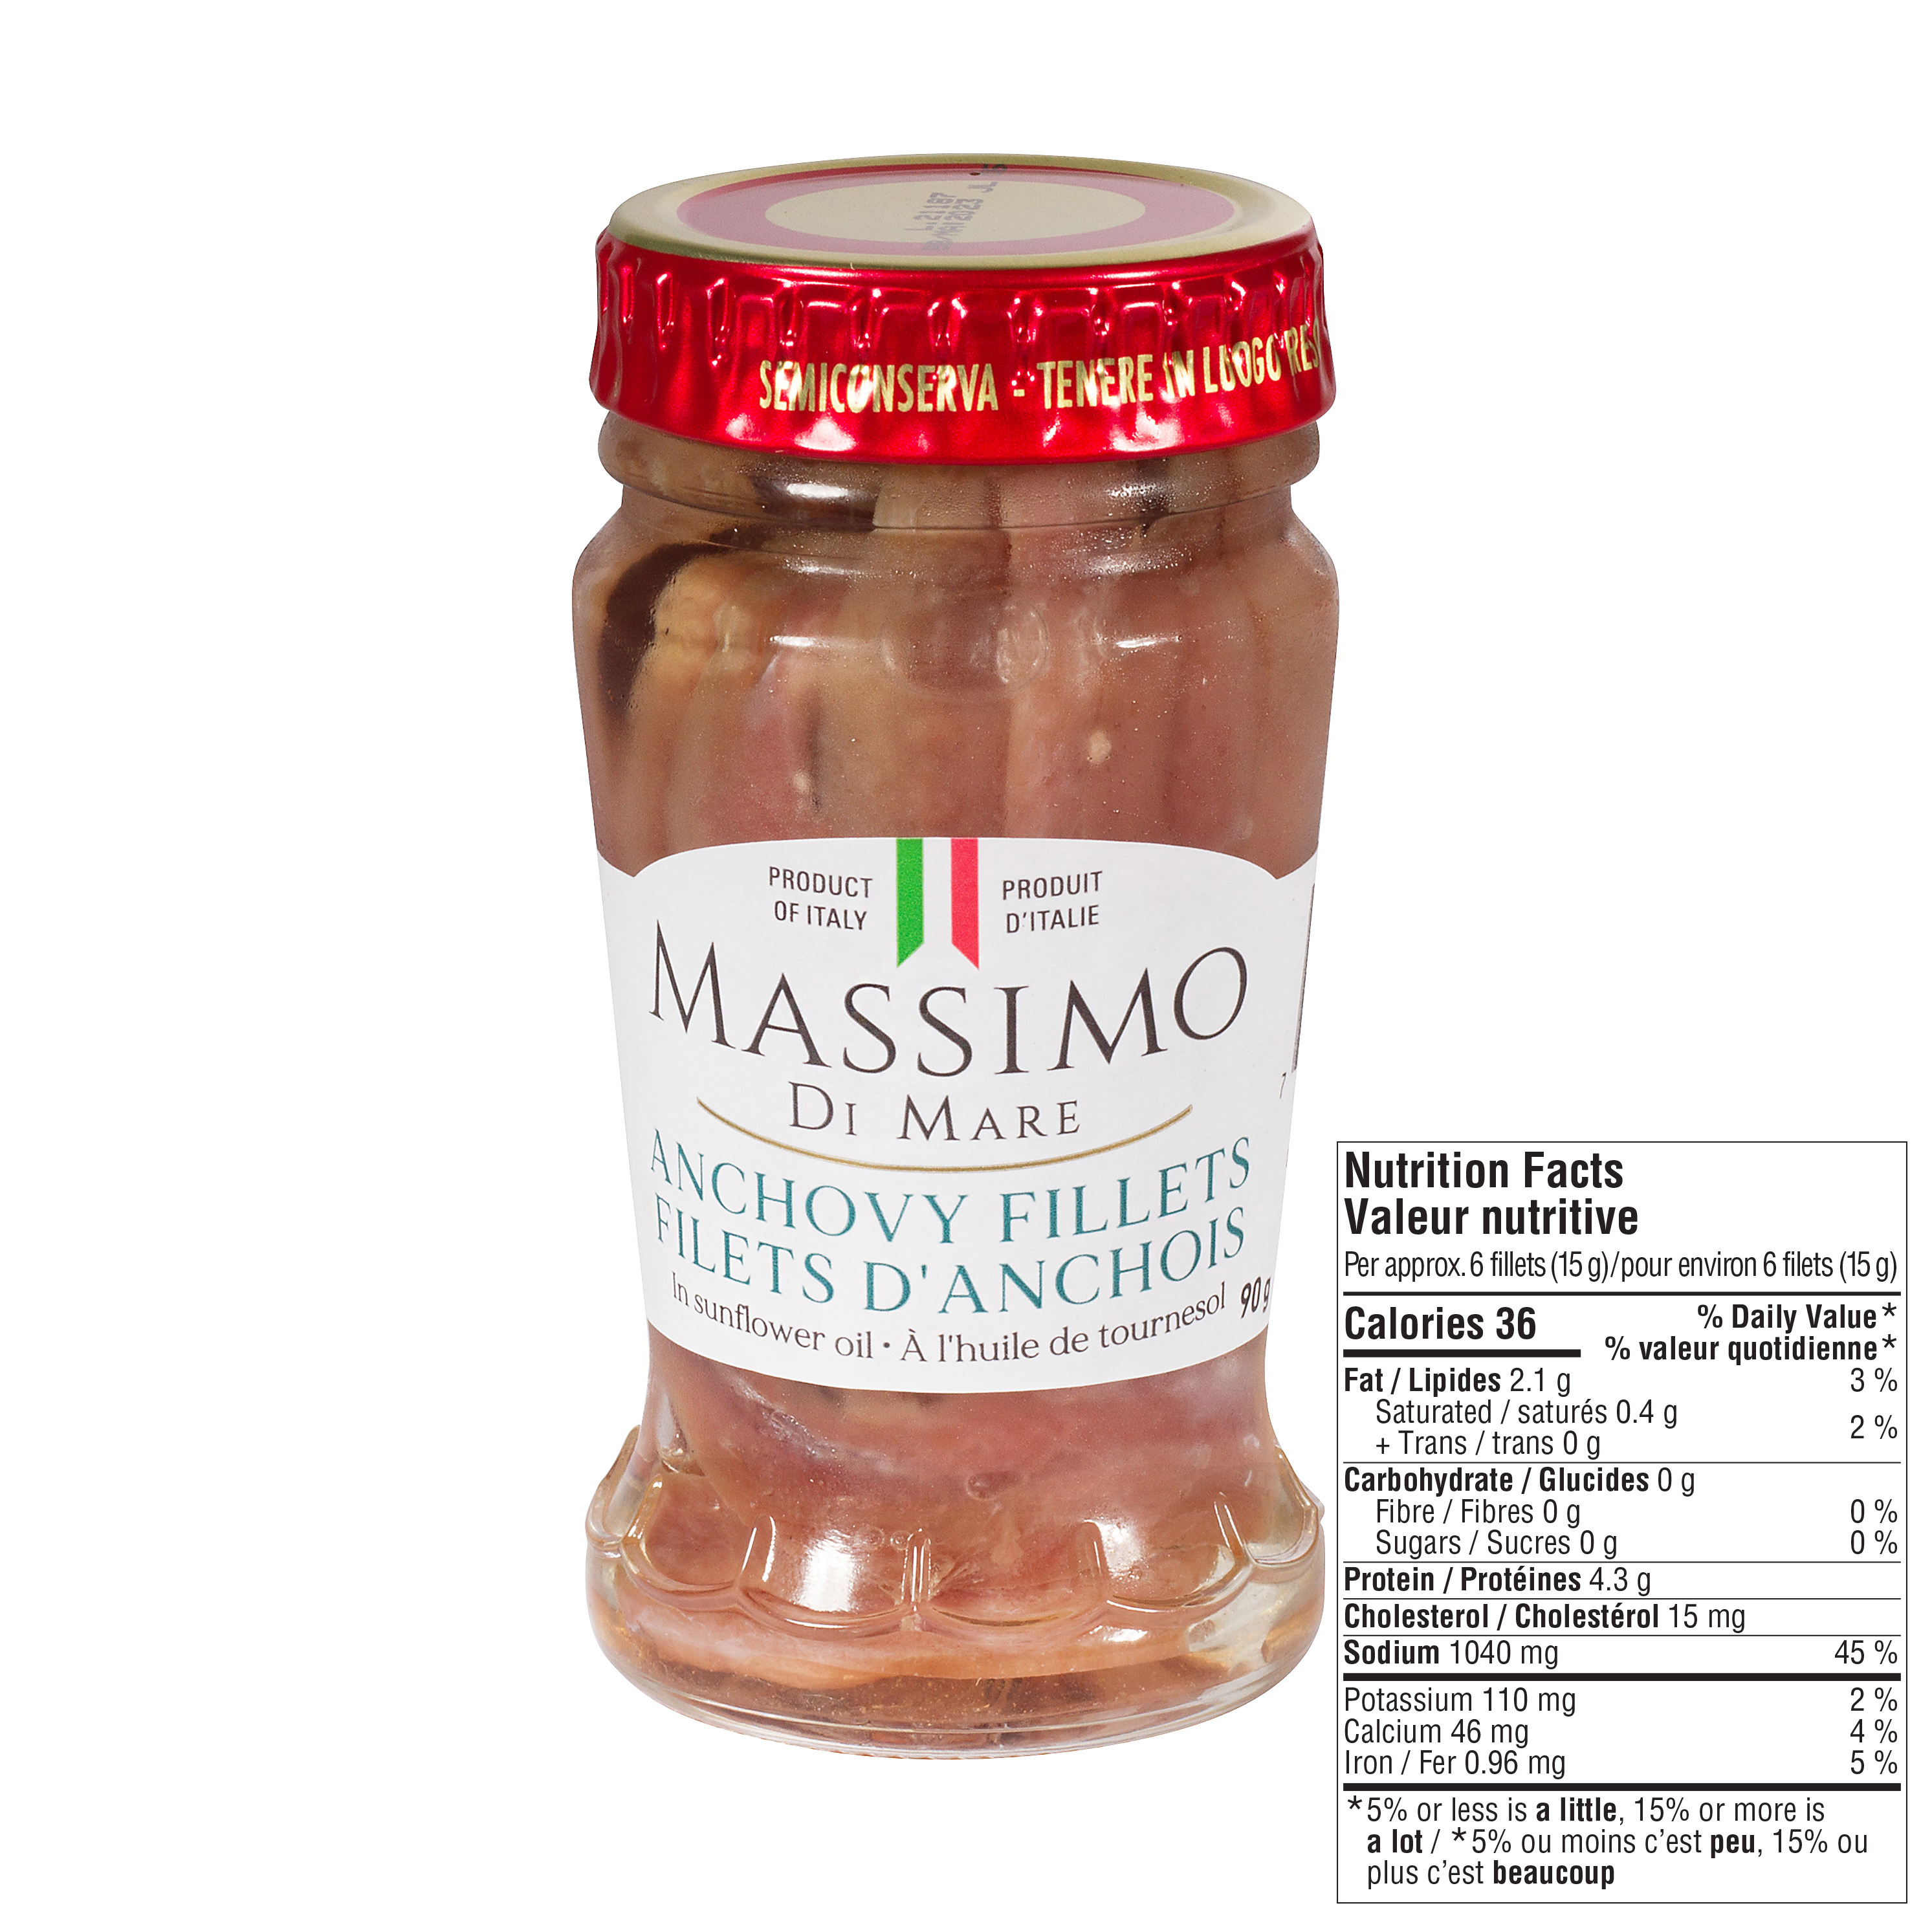 MASSIMO Anchovy Fillets in Sunflower Oil - 90g